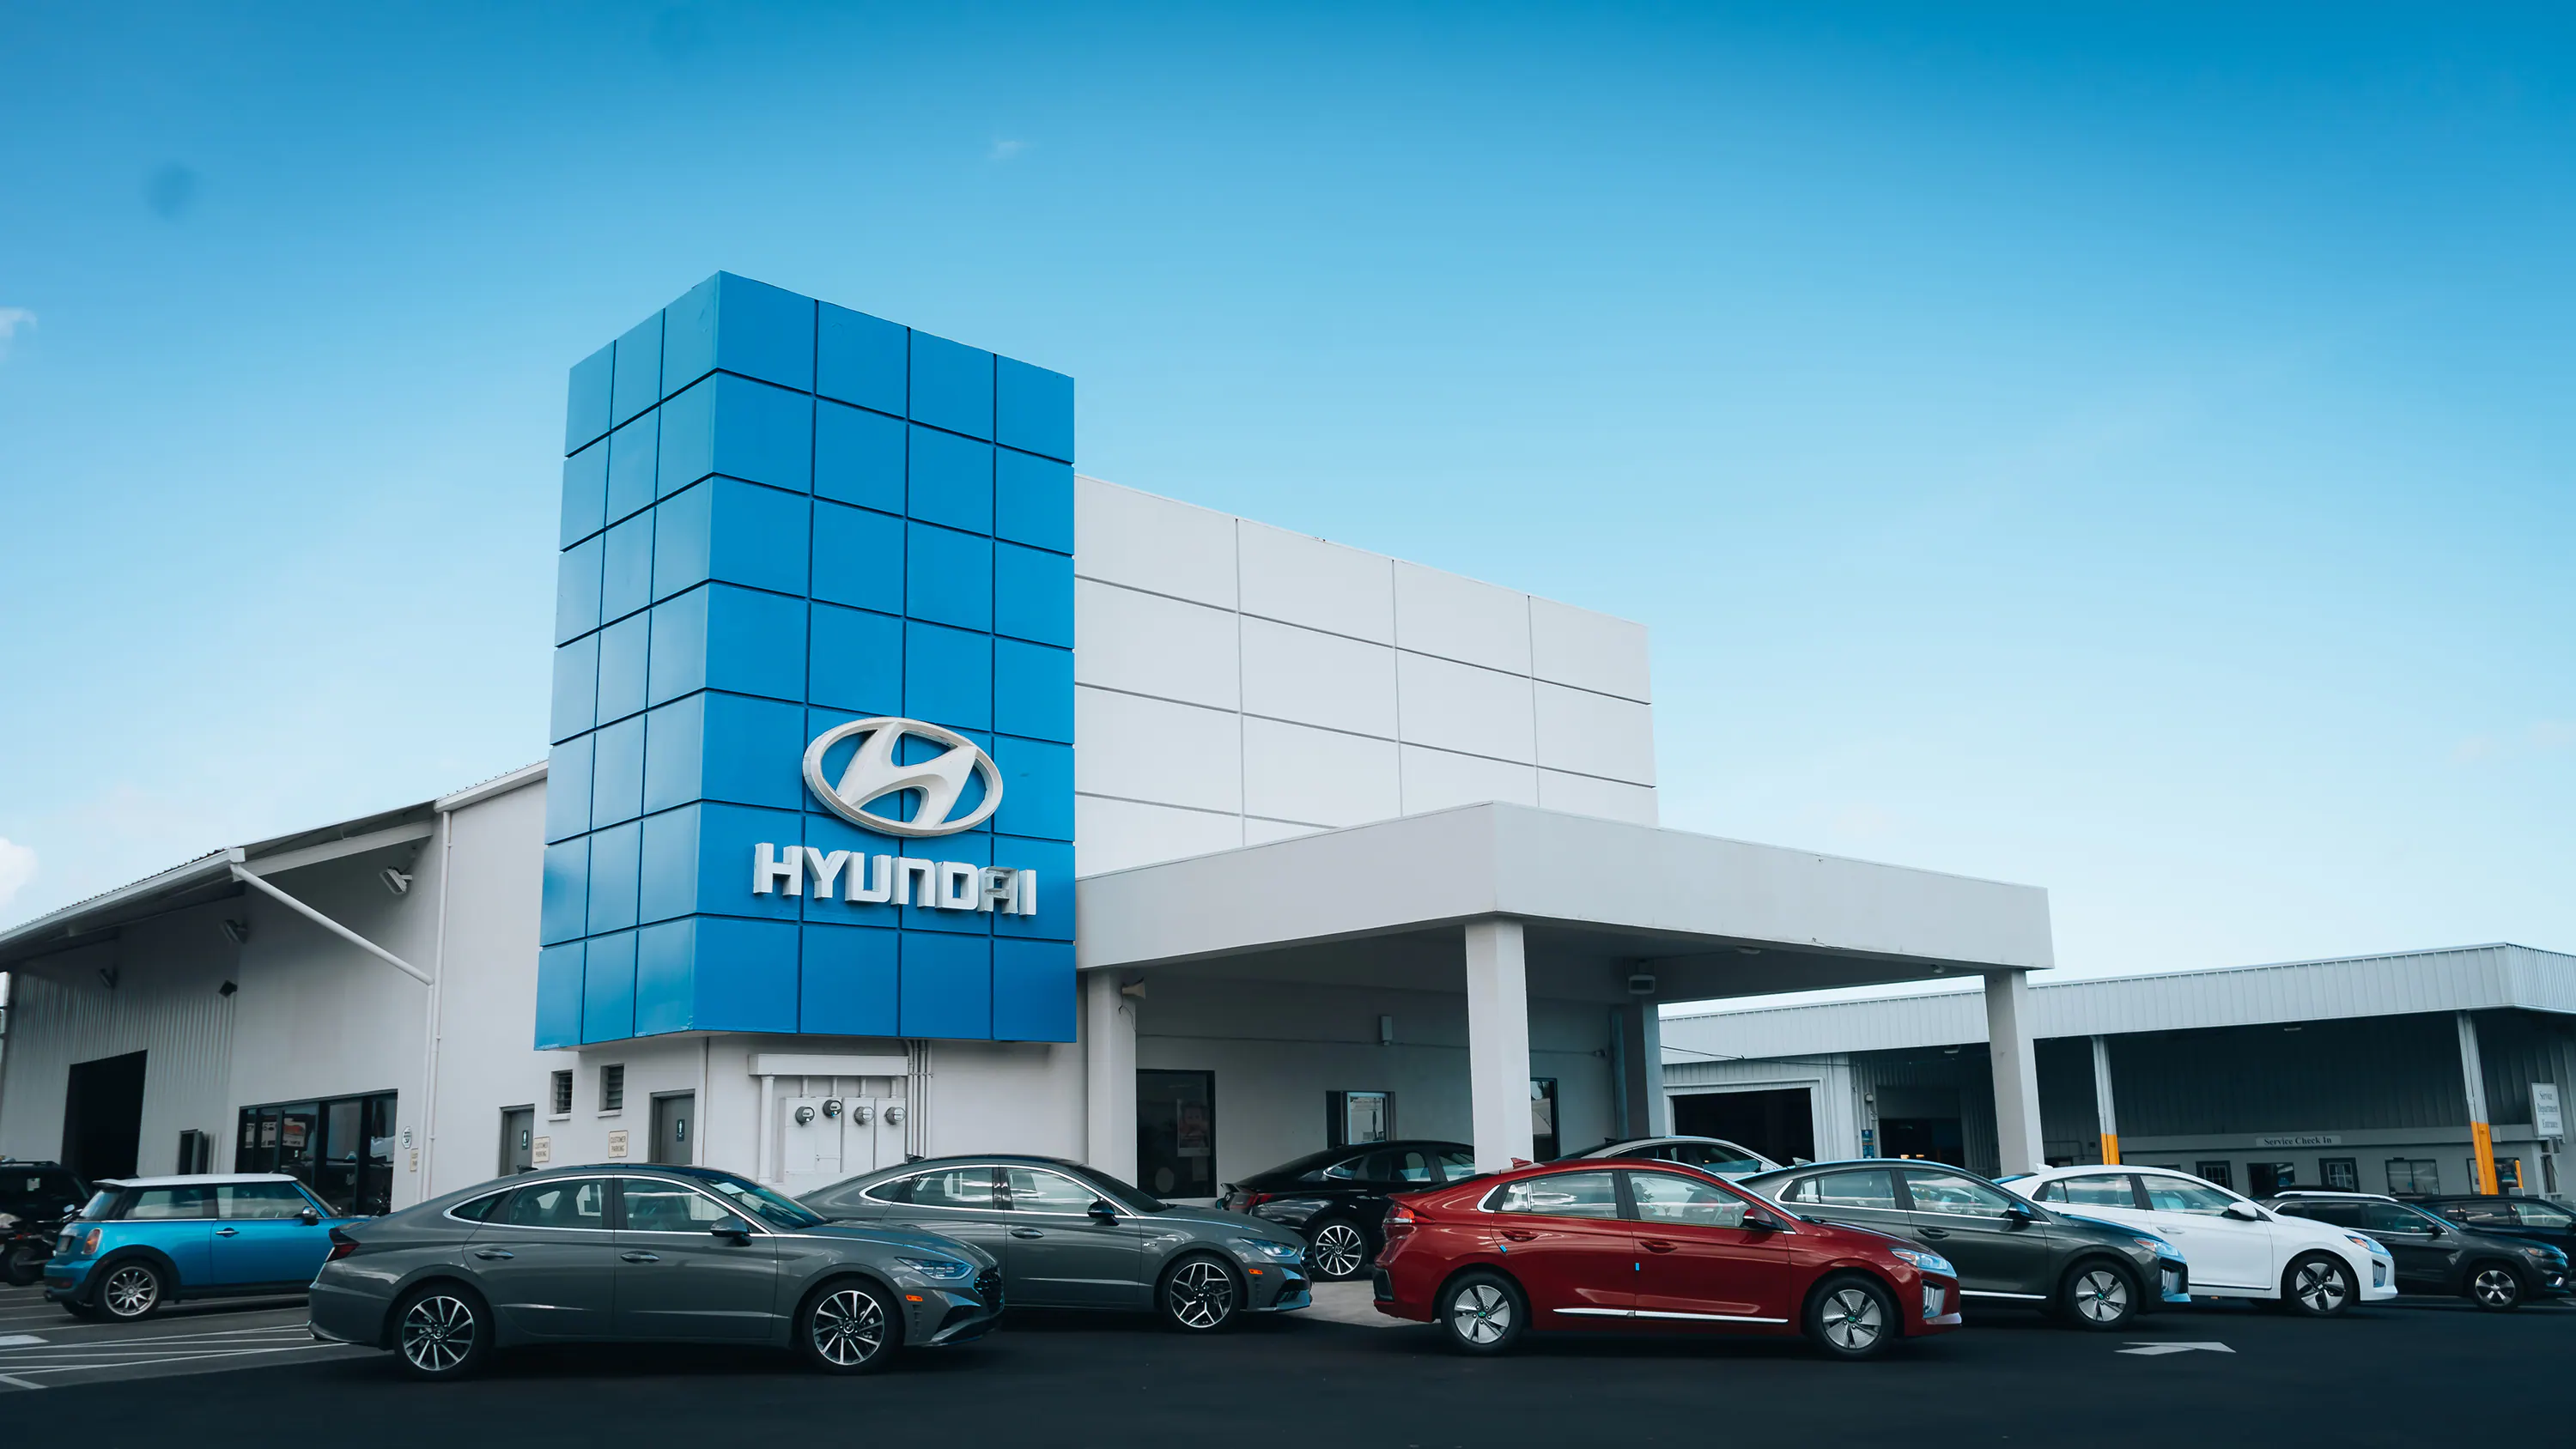 Windward Hyundai building with cars in front